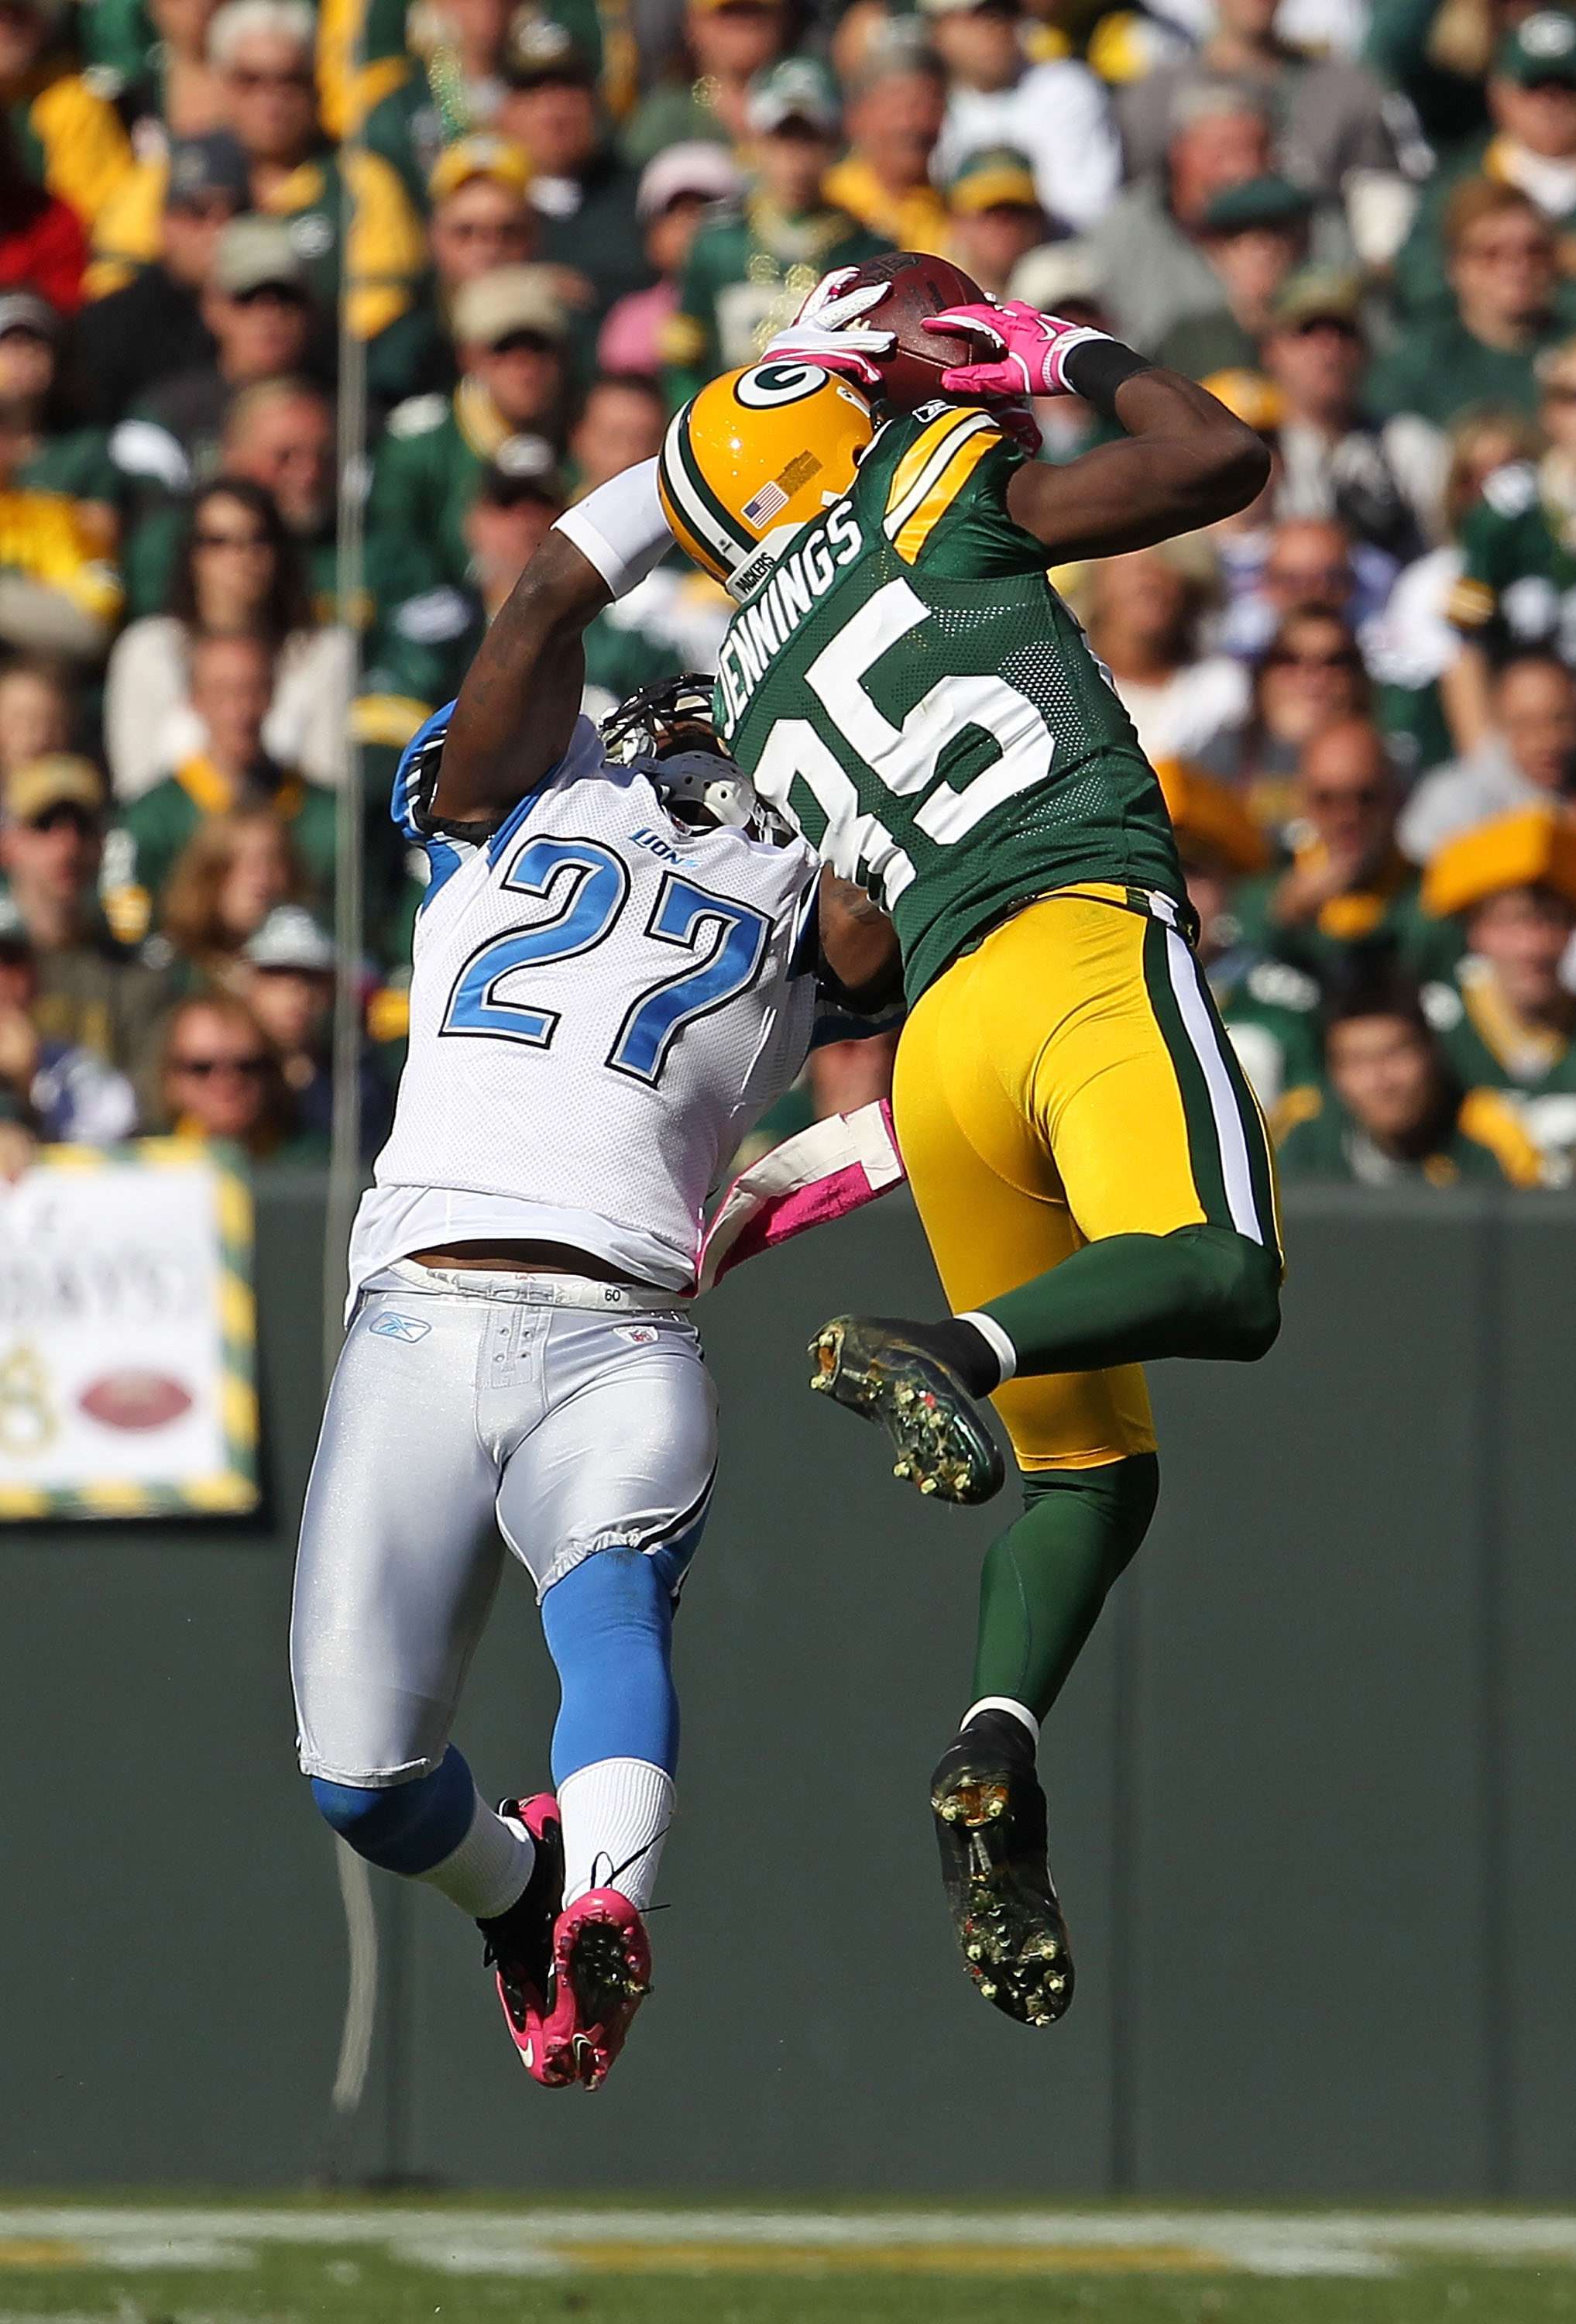 GREEN BAY, WI - OCTOBER 03: Alphonso Smith #27 of the Detroit Lions takes the ball away from Greg Jennings #85 of the Green Bay Packers for an interception at Lambeau Field on October 3, 2010 in Green Bay, Wisconsin. The Packers defeated the Lions 28-26.